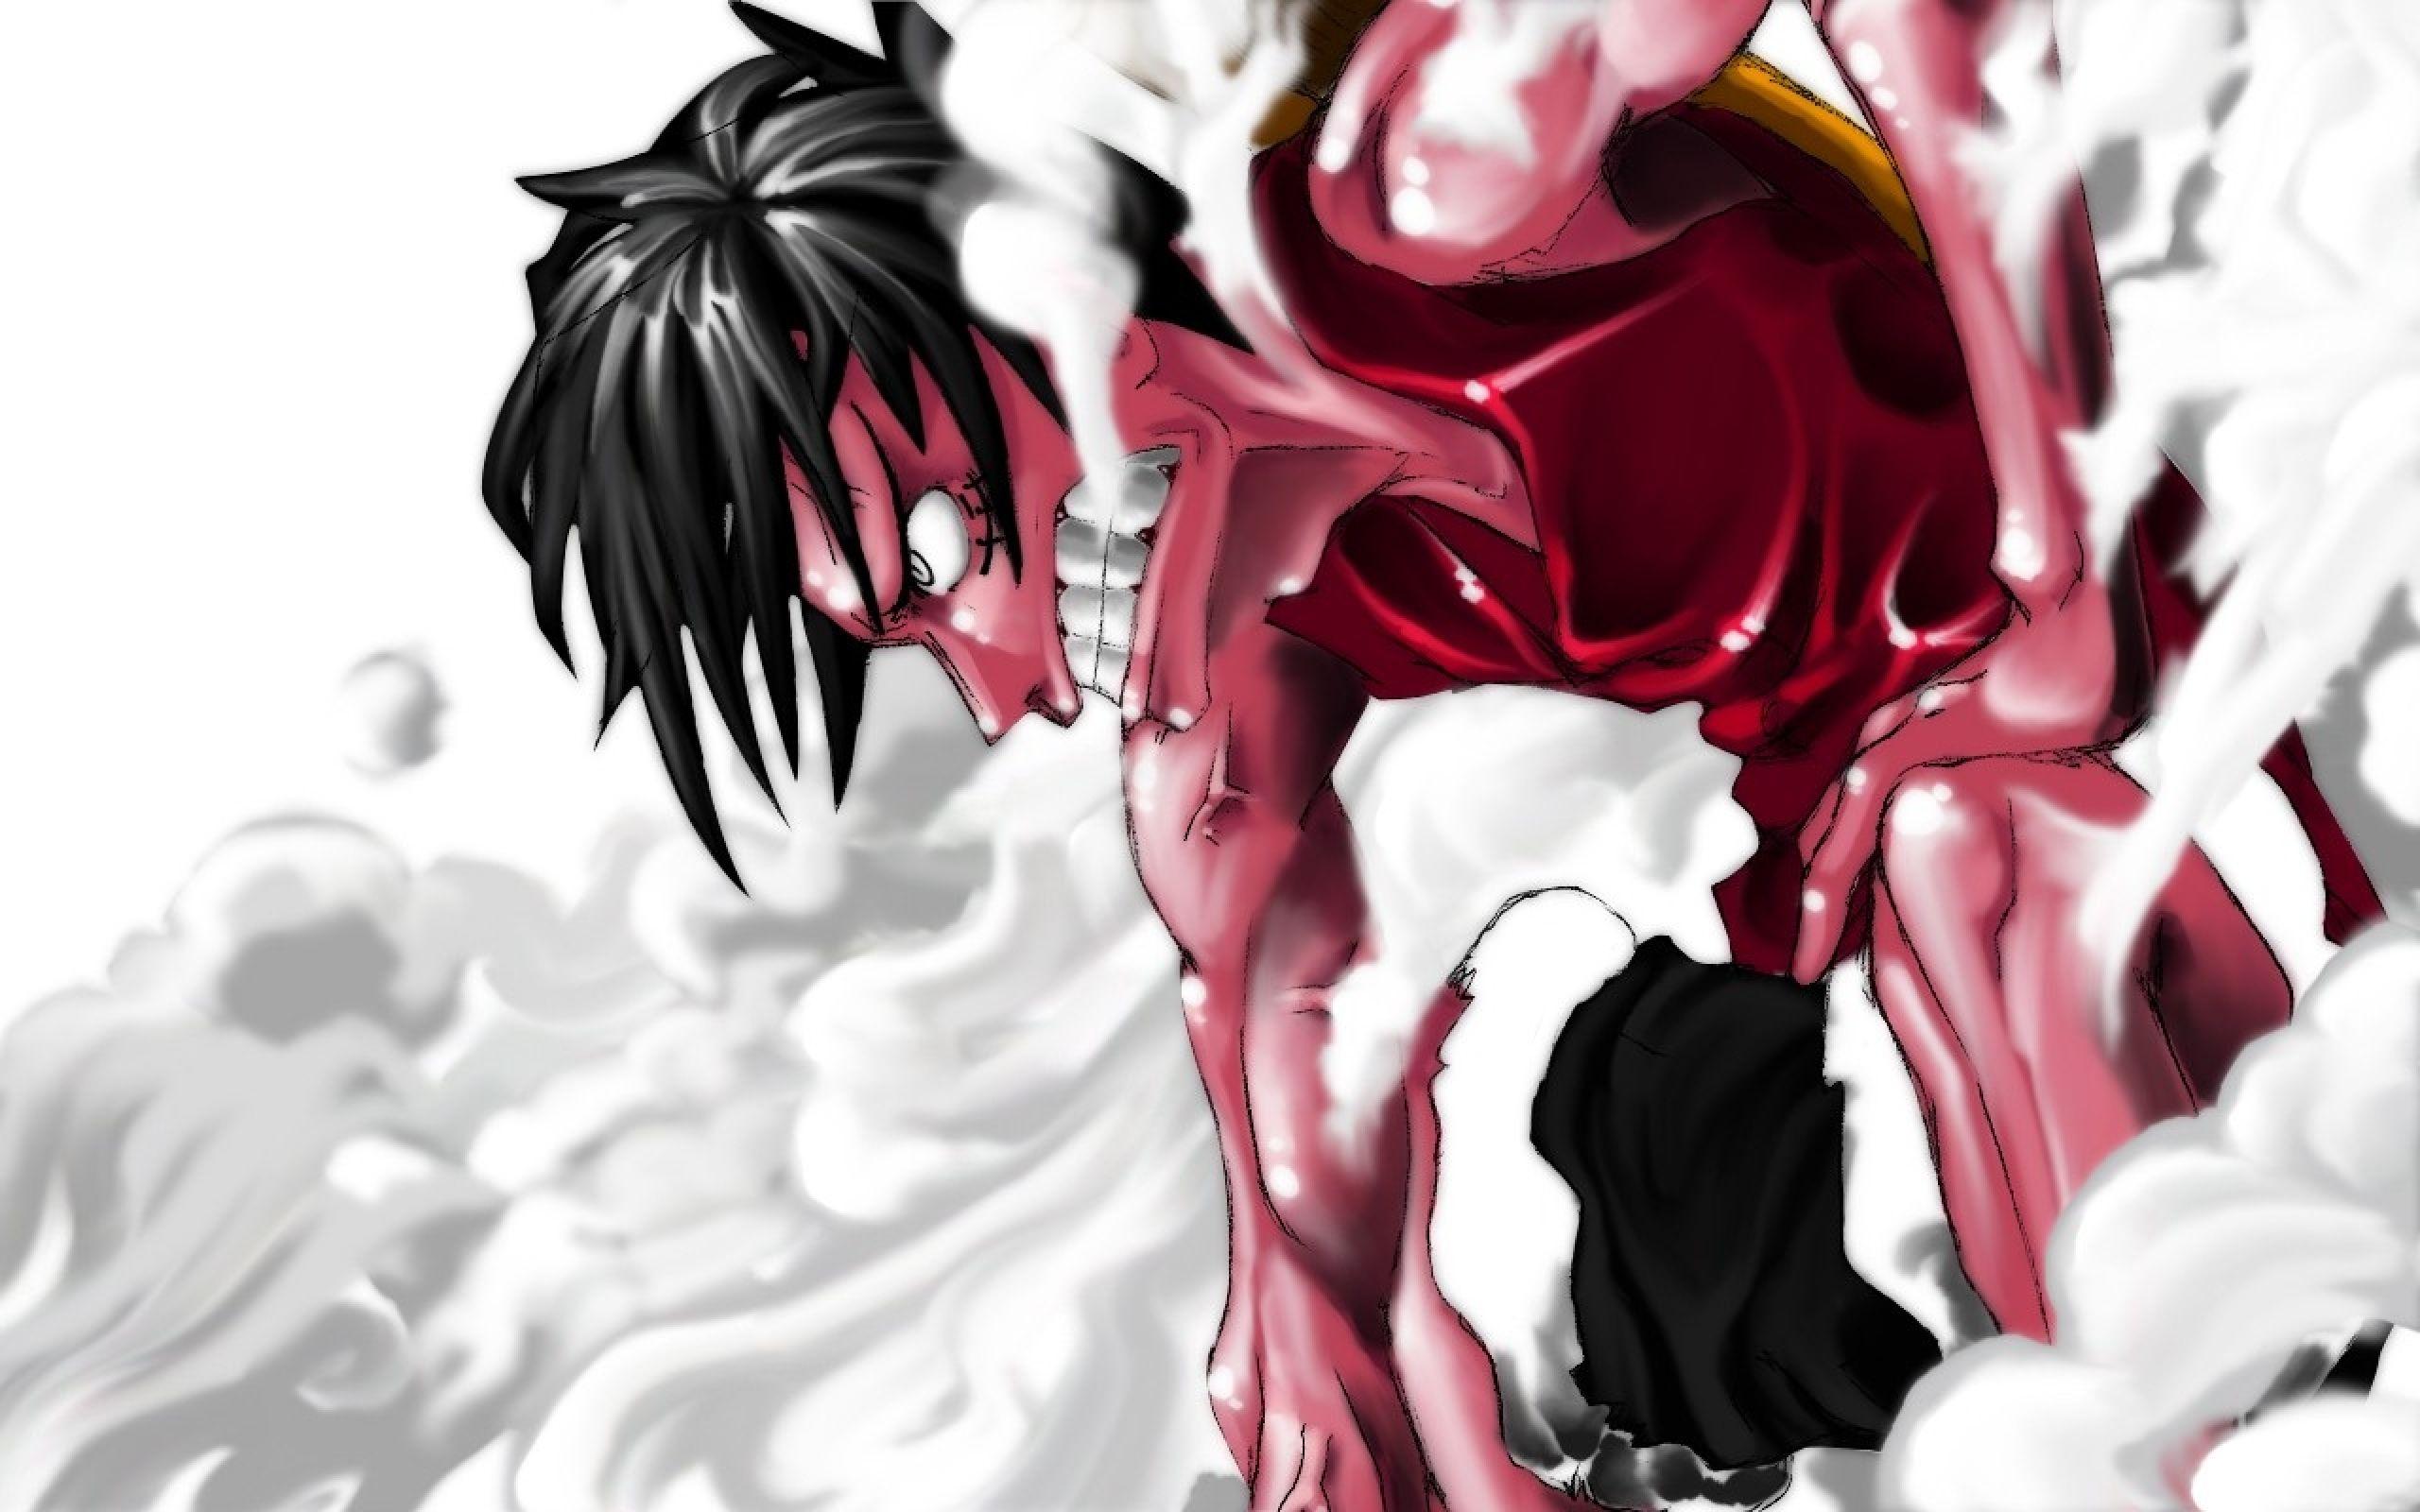 Luffy Gear 2 Wallpaper - One Piece Luffy Gear Second | One piece images, One piece - We hope